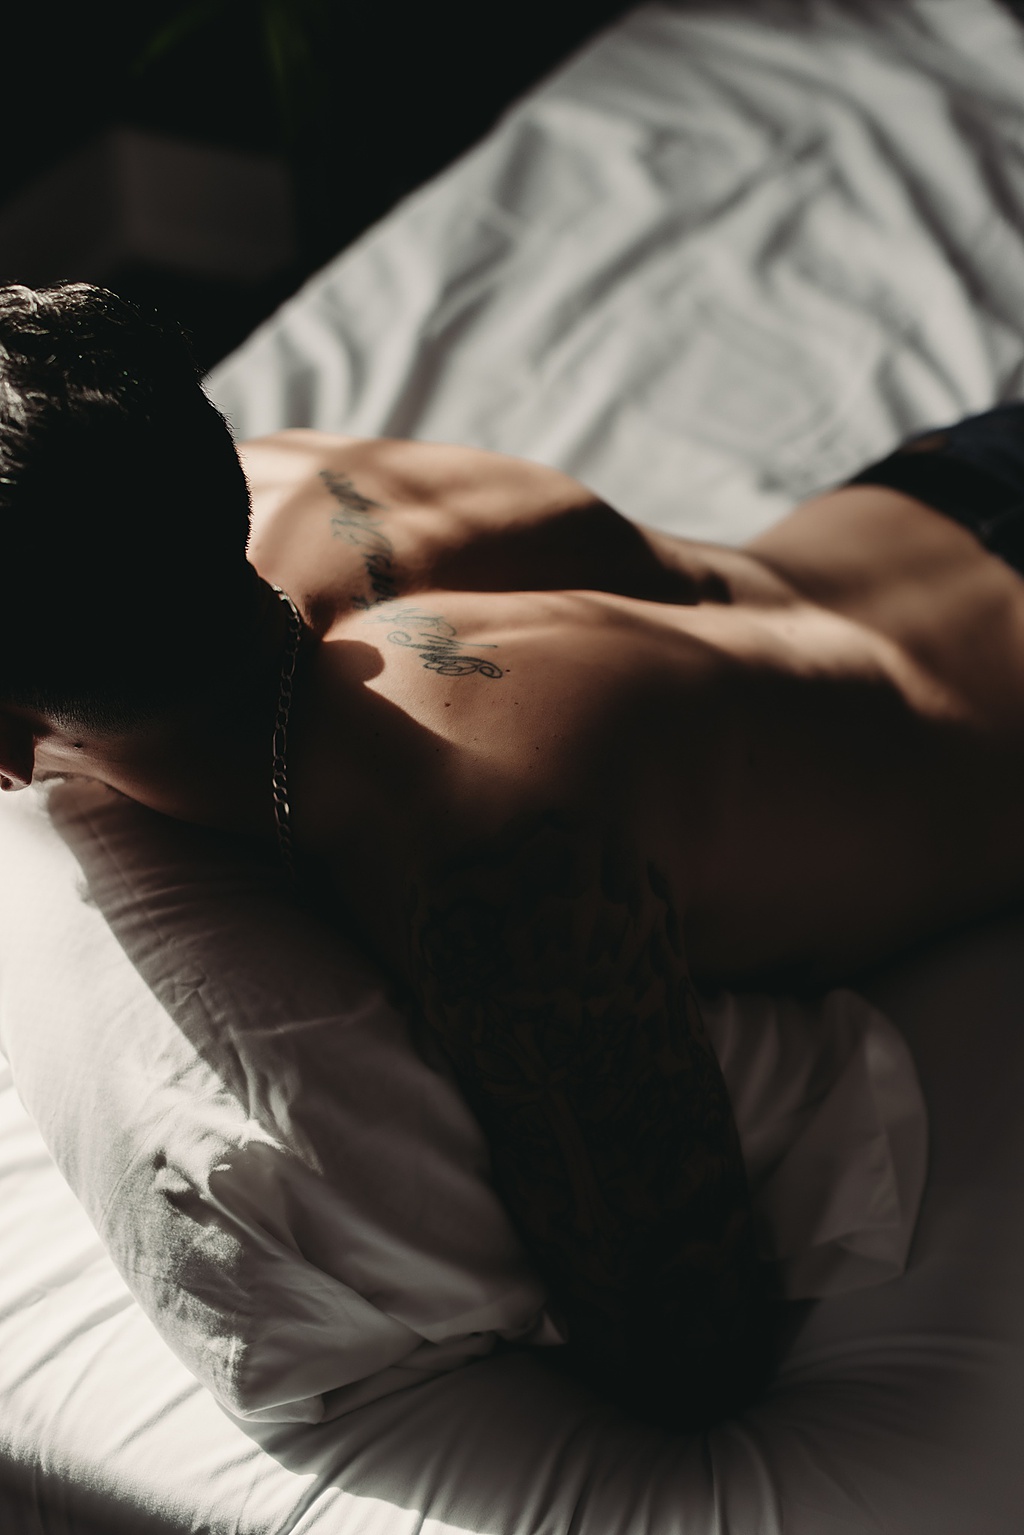 men's boudoir picture of a man's back with tattoos